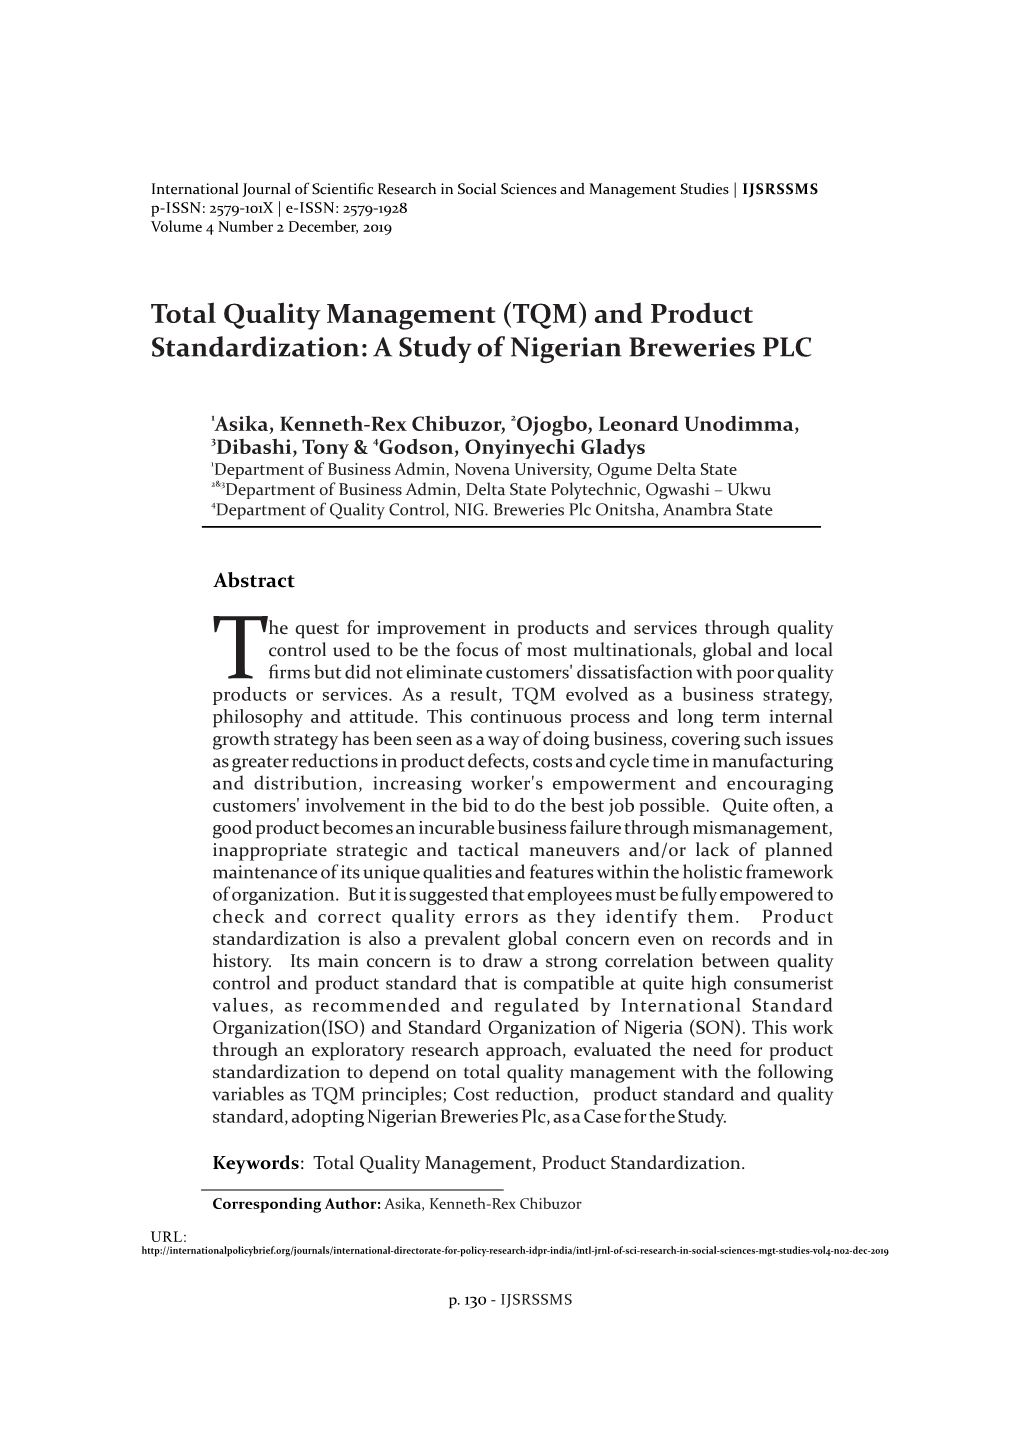 (TQM) and Product Standardization: a Study of Nigerian Breweries PLC